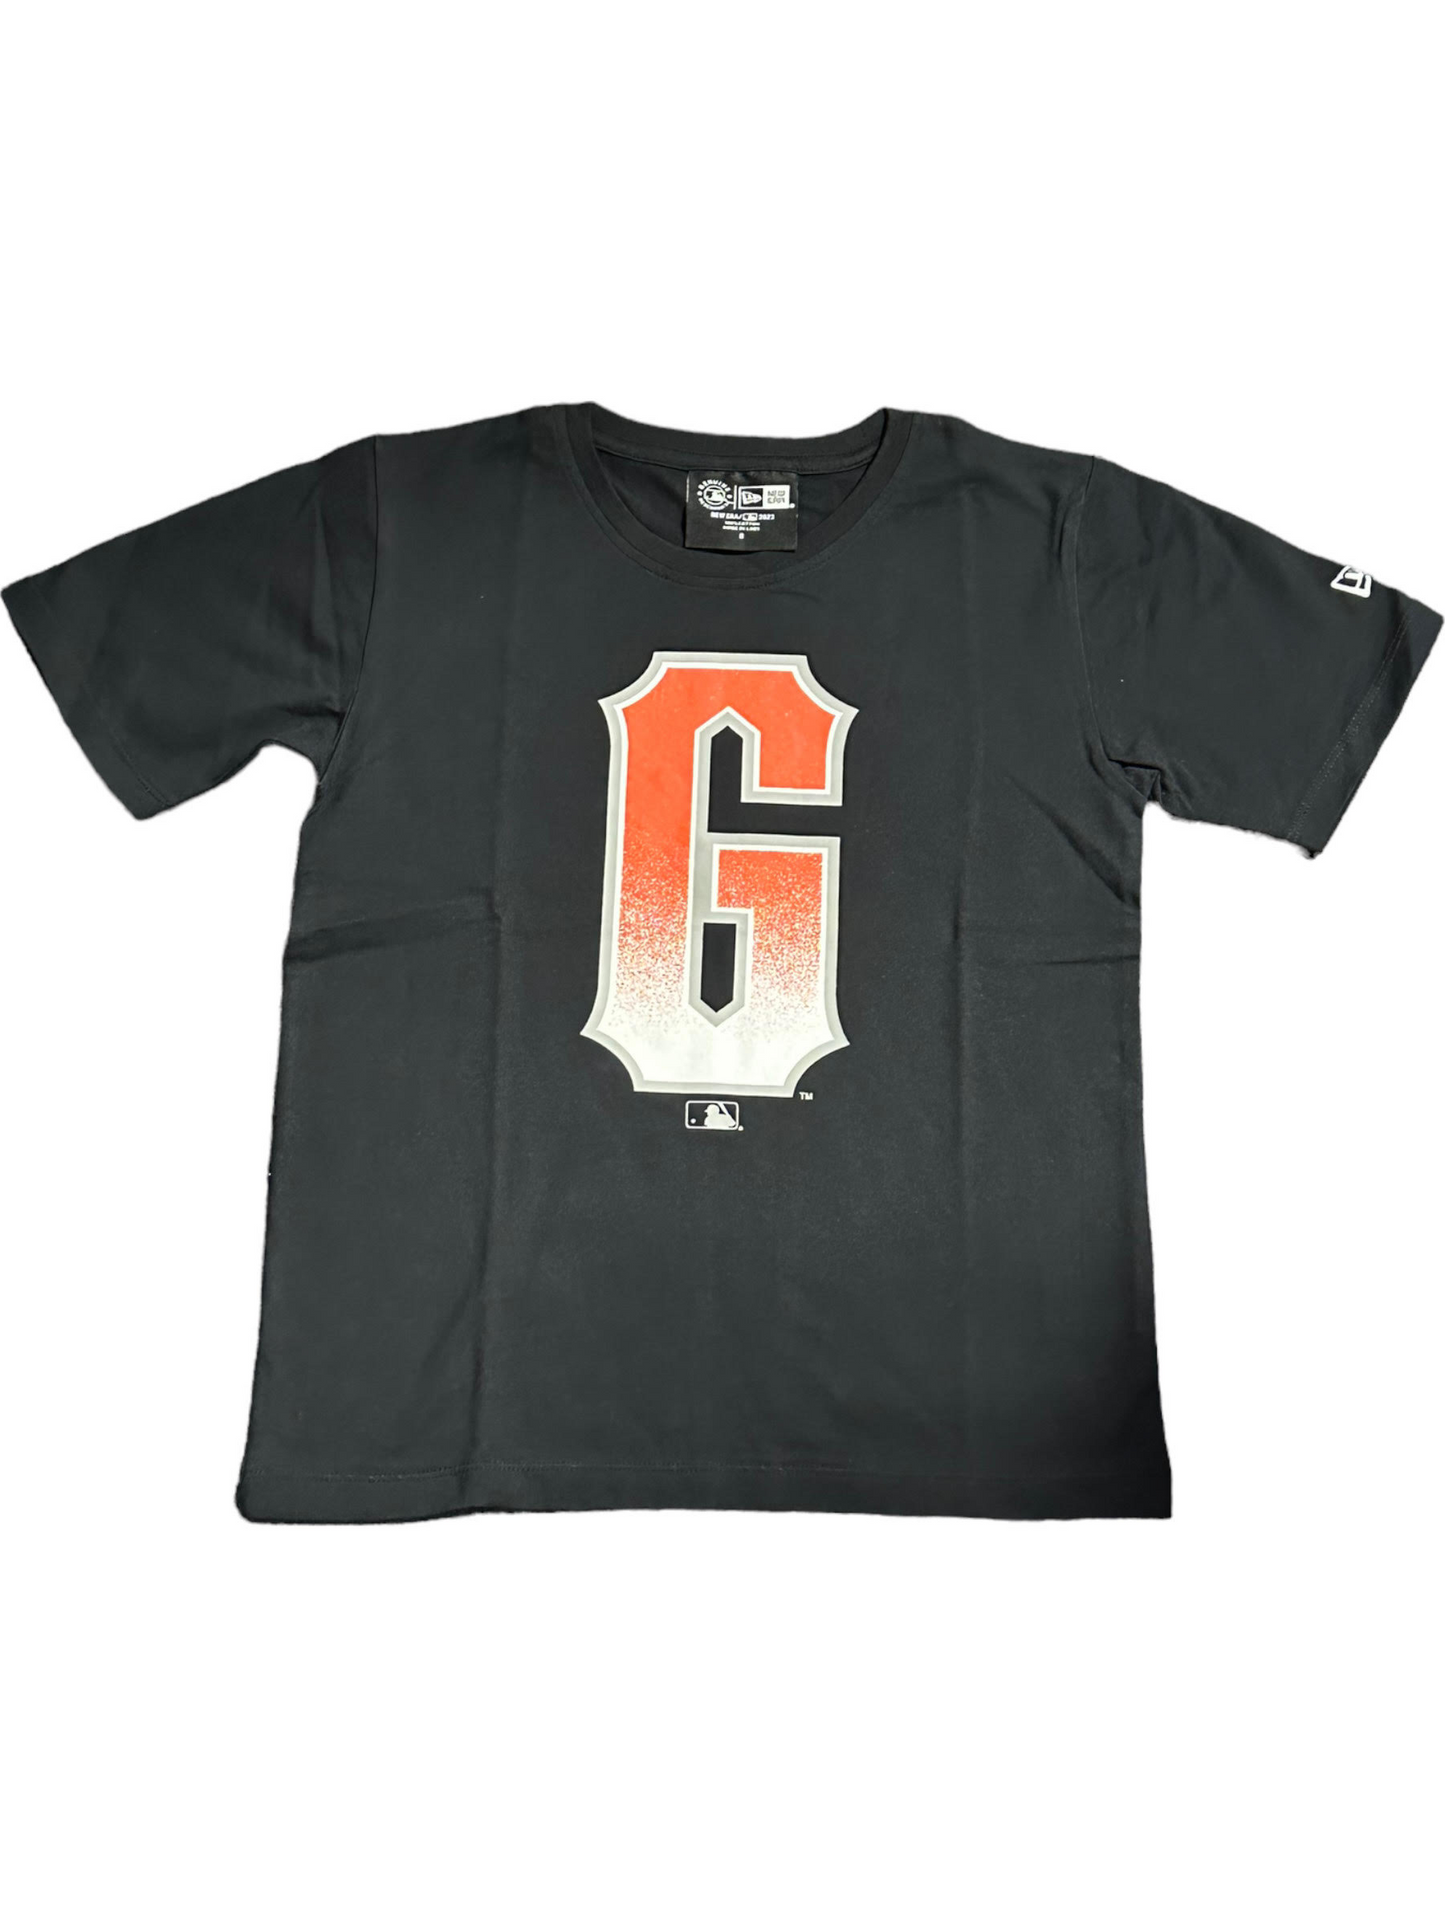 SAN FRANCISCO GIANTS YOUTH CITY CONNECT ALTERNATE T-SHIRT